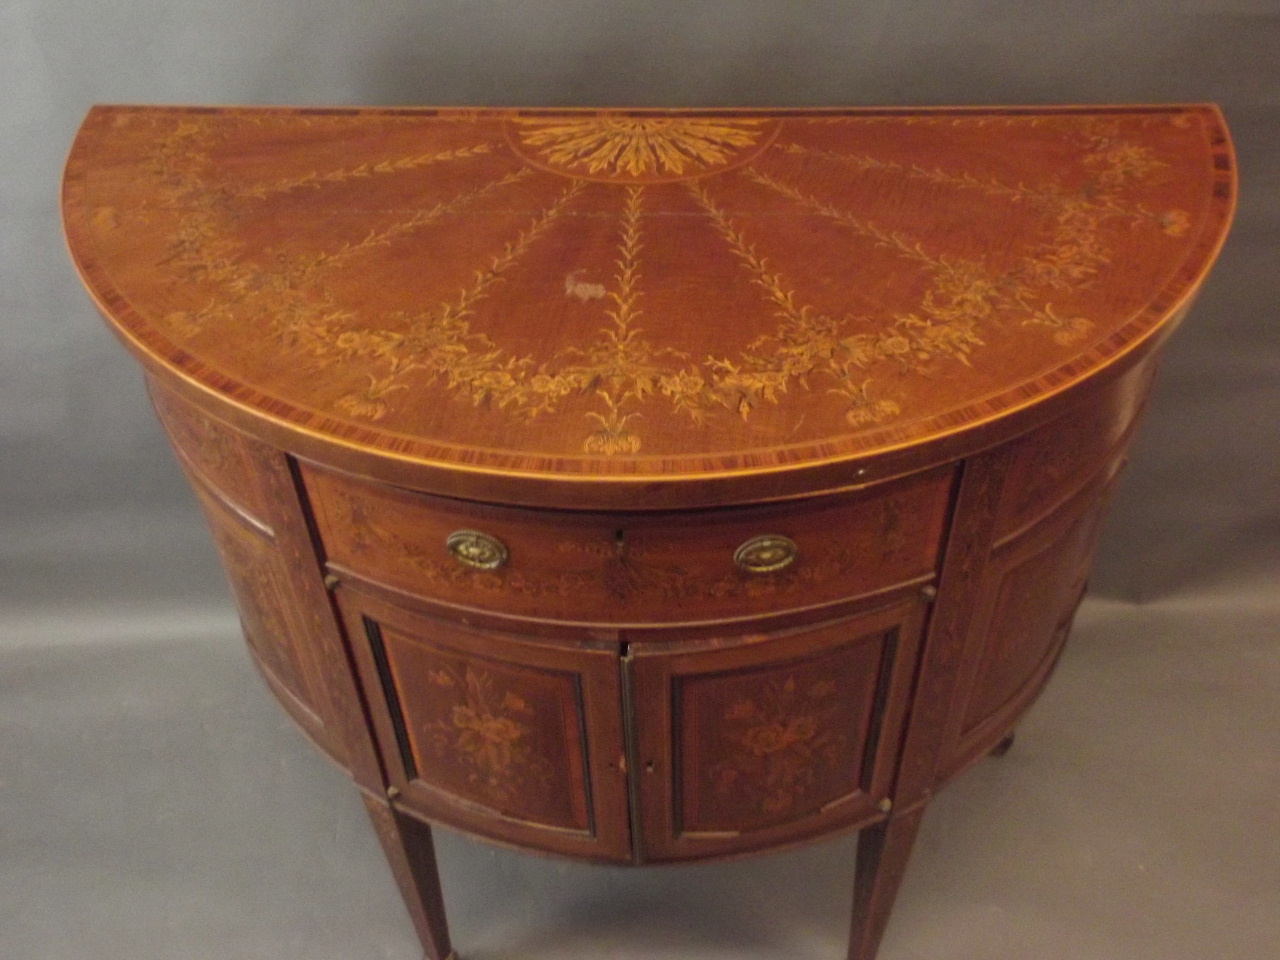 A C19th figured mahogany demi-lune side cabinet with Adam style penwork inlaid decoration of - Image 2 of 5